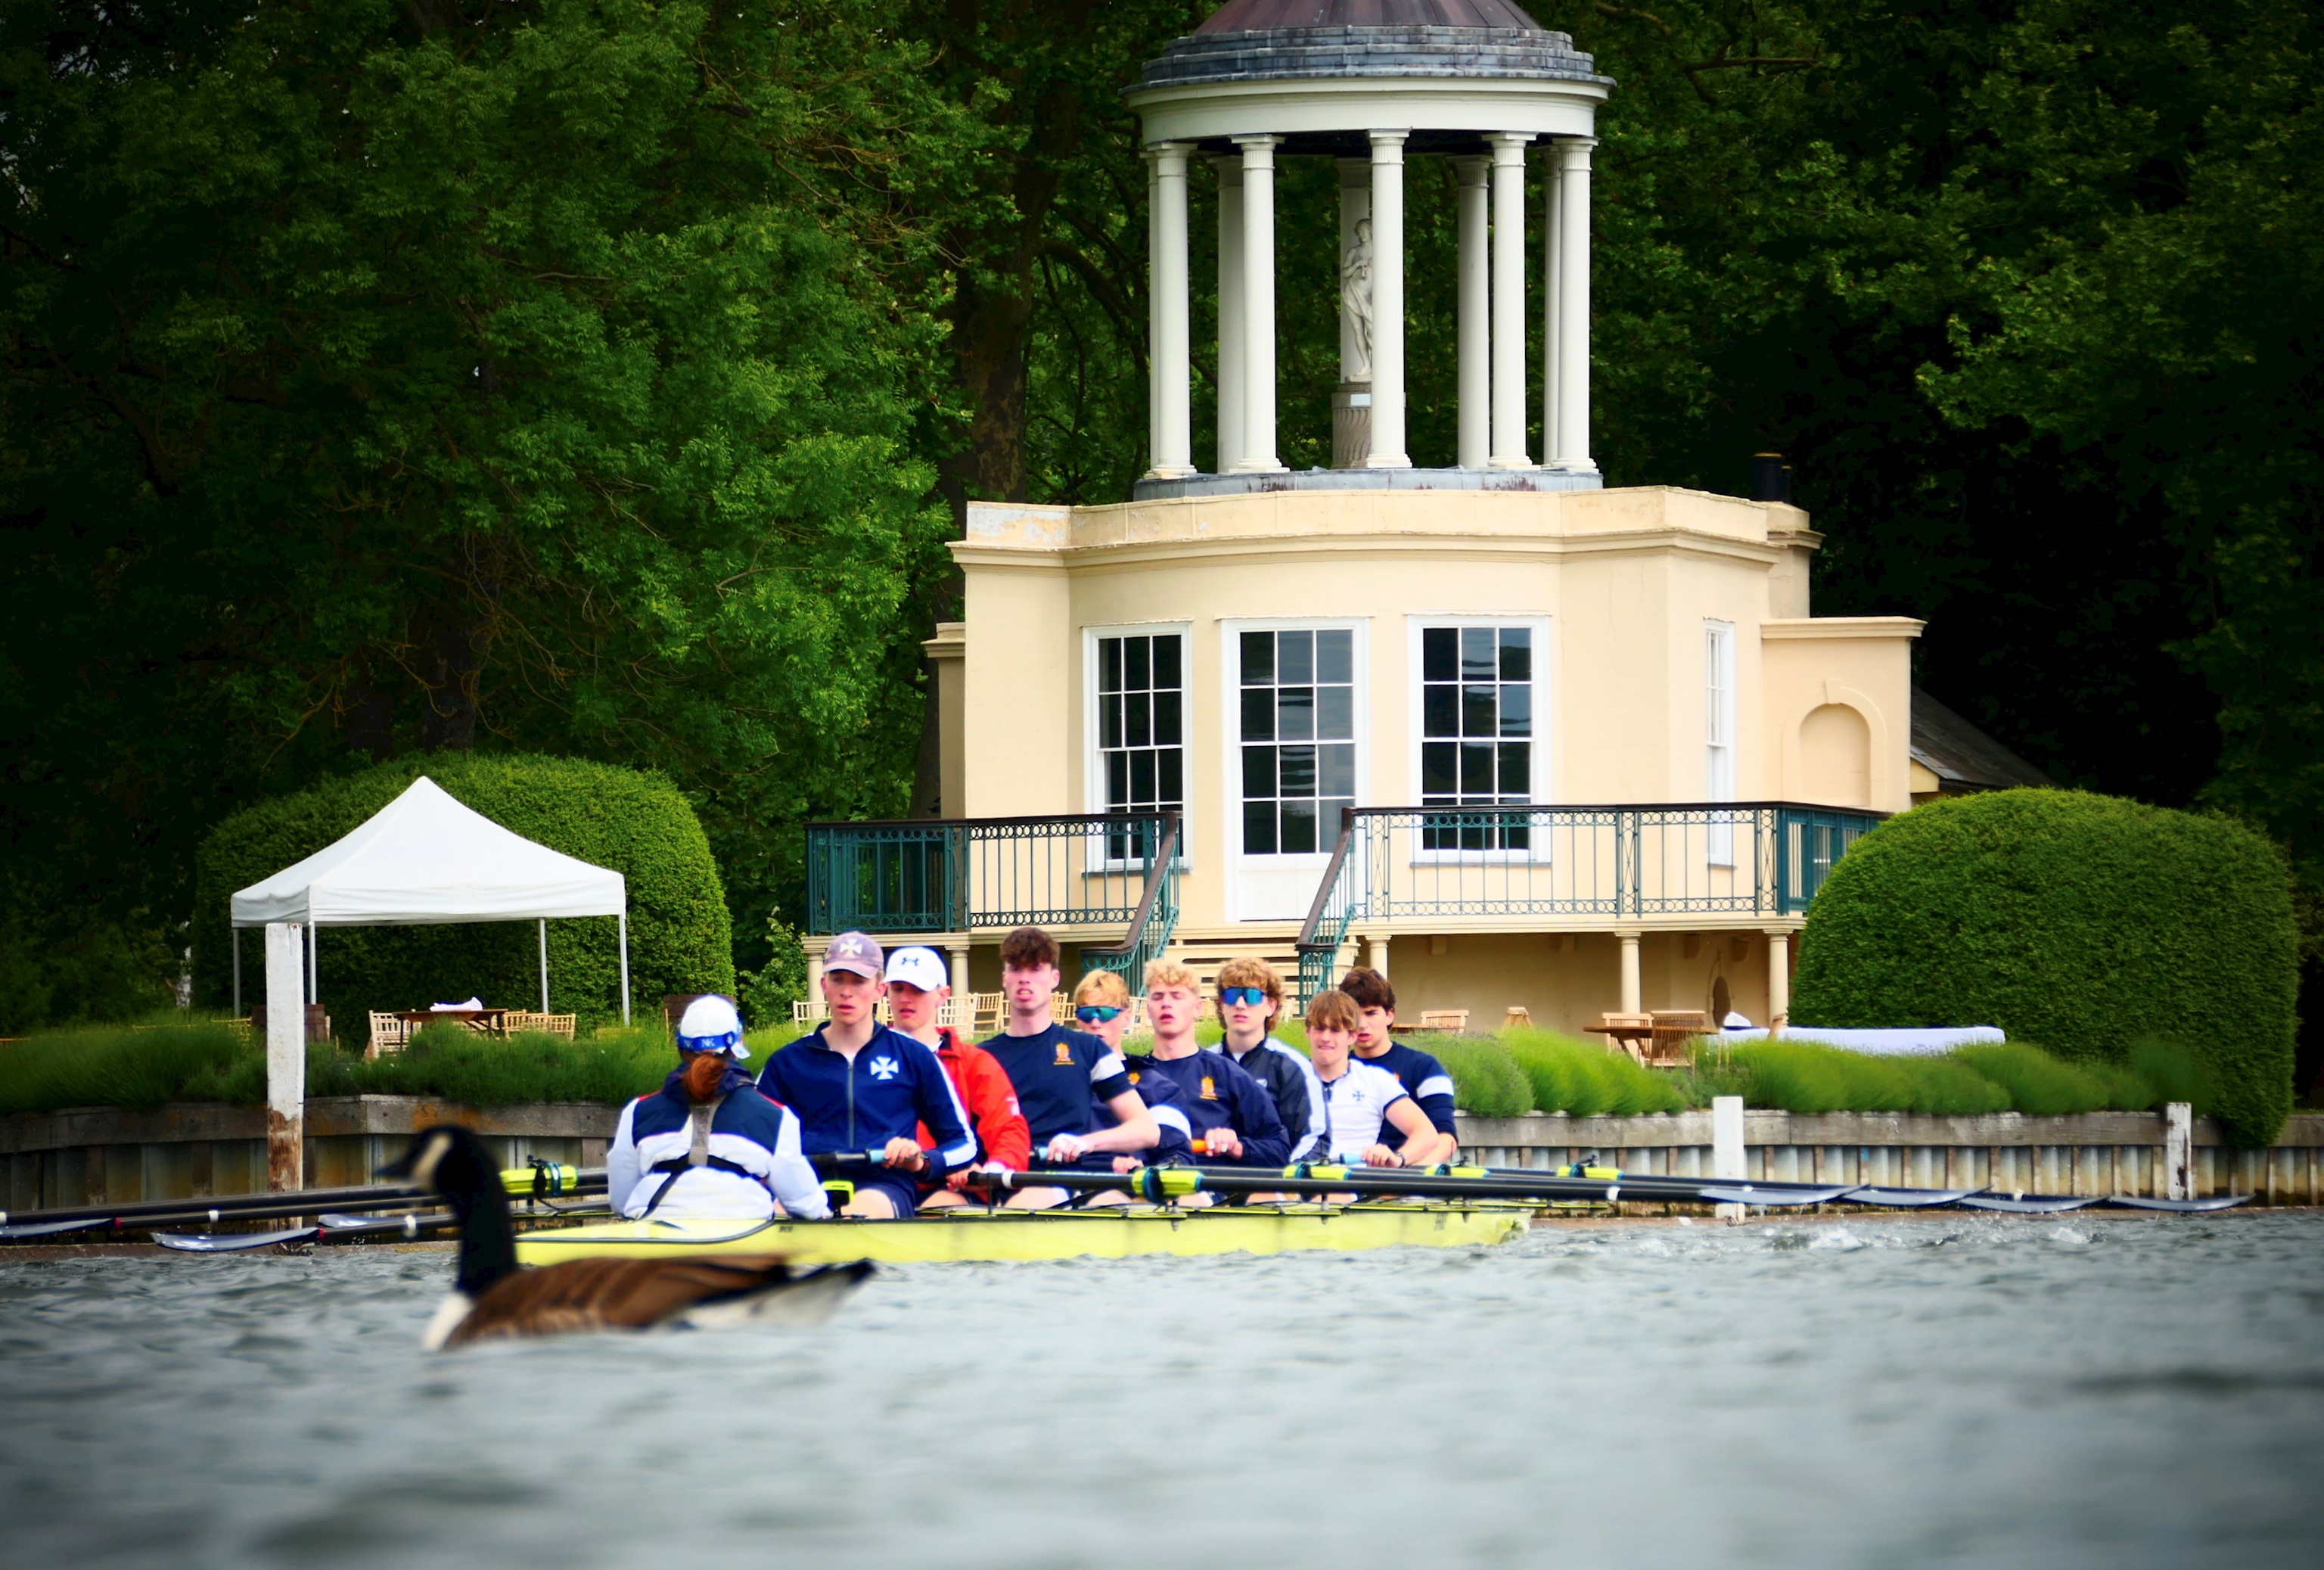 Rowers gain experience at Henley ahead of the Royal Regatta 